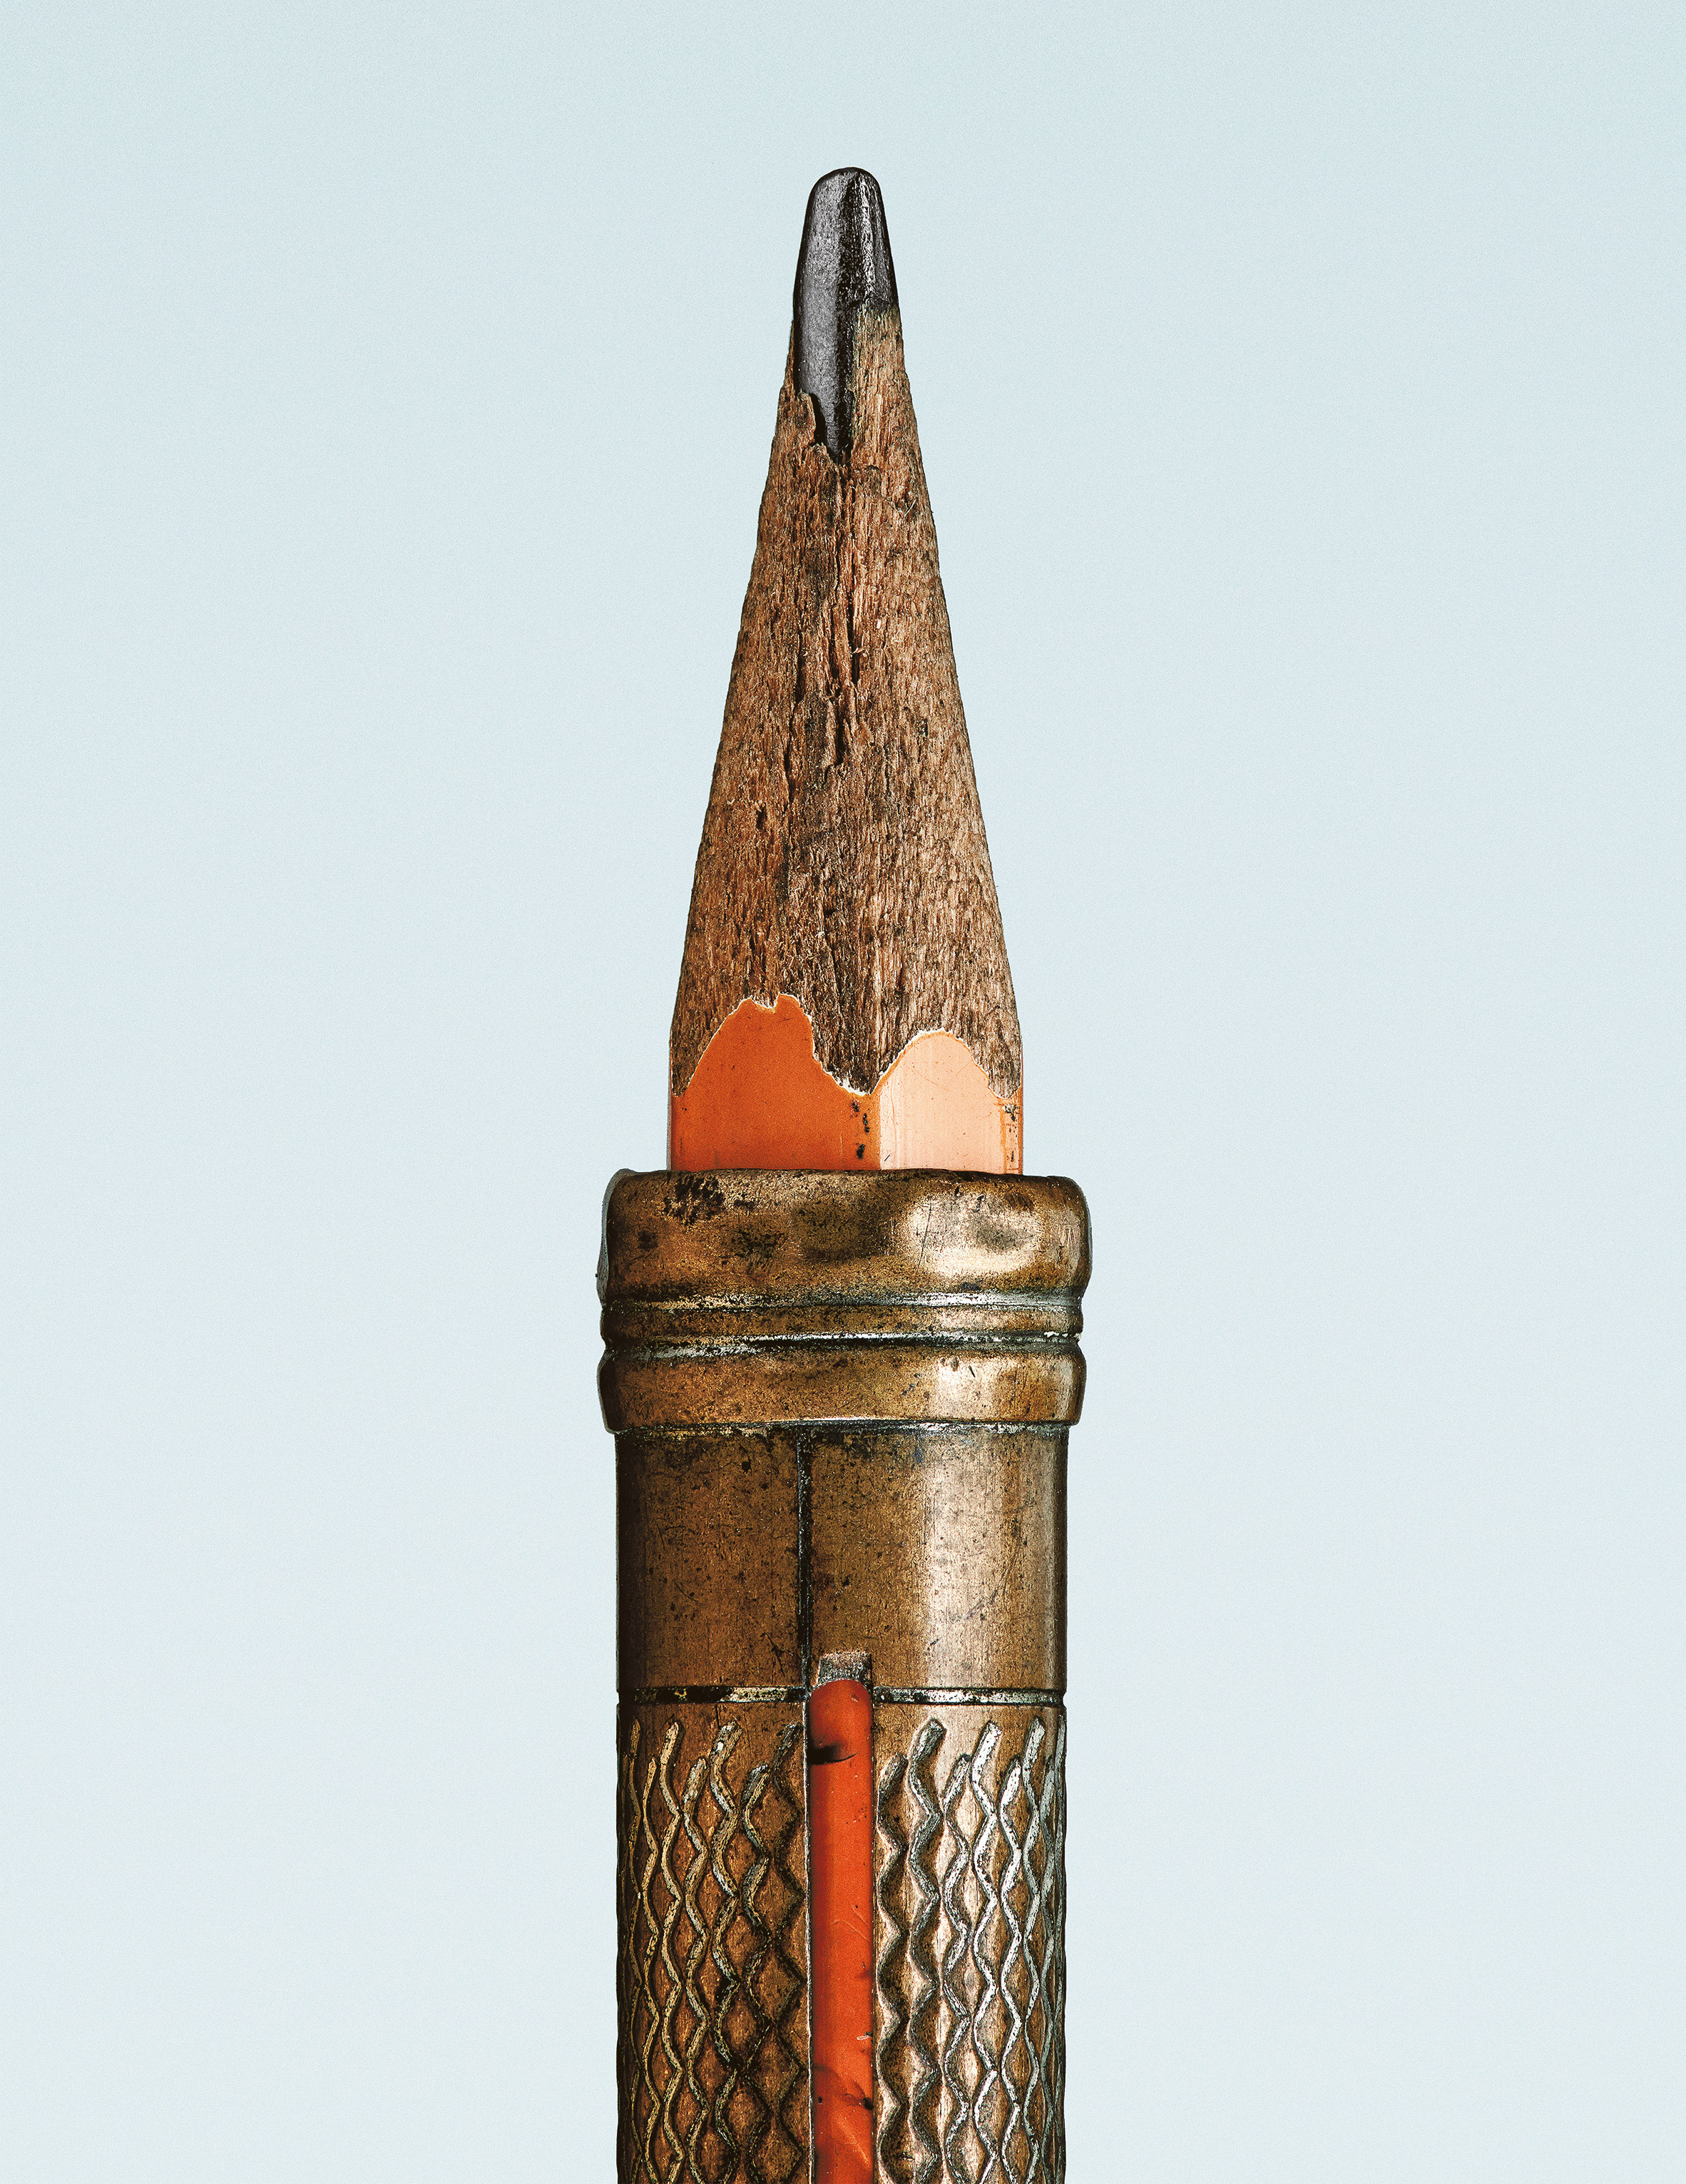 The Secret Life of the Pencil by Alex Hammond and Mike Tinney